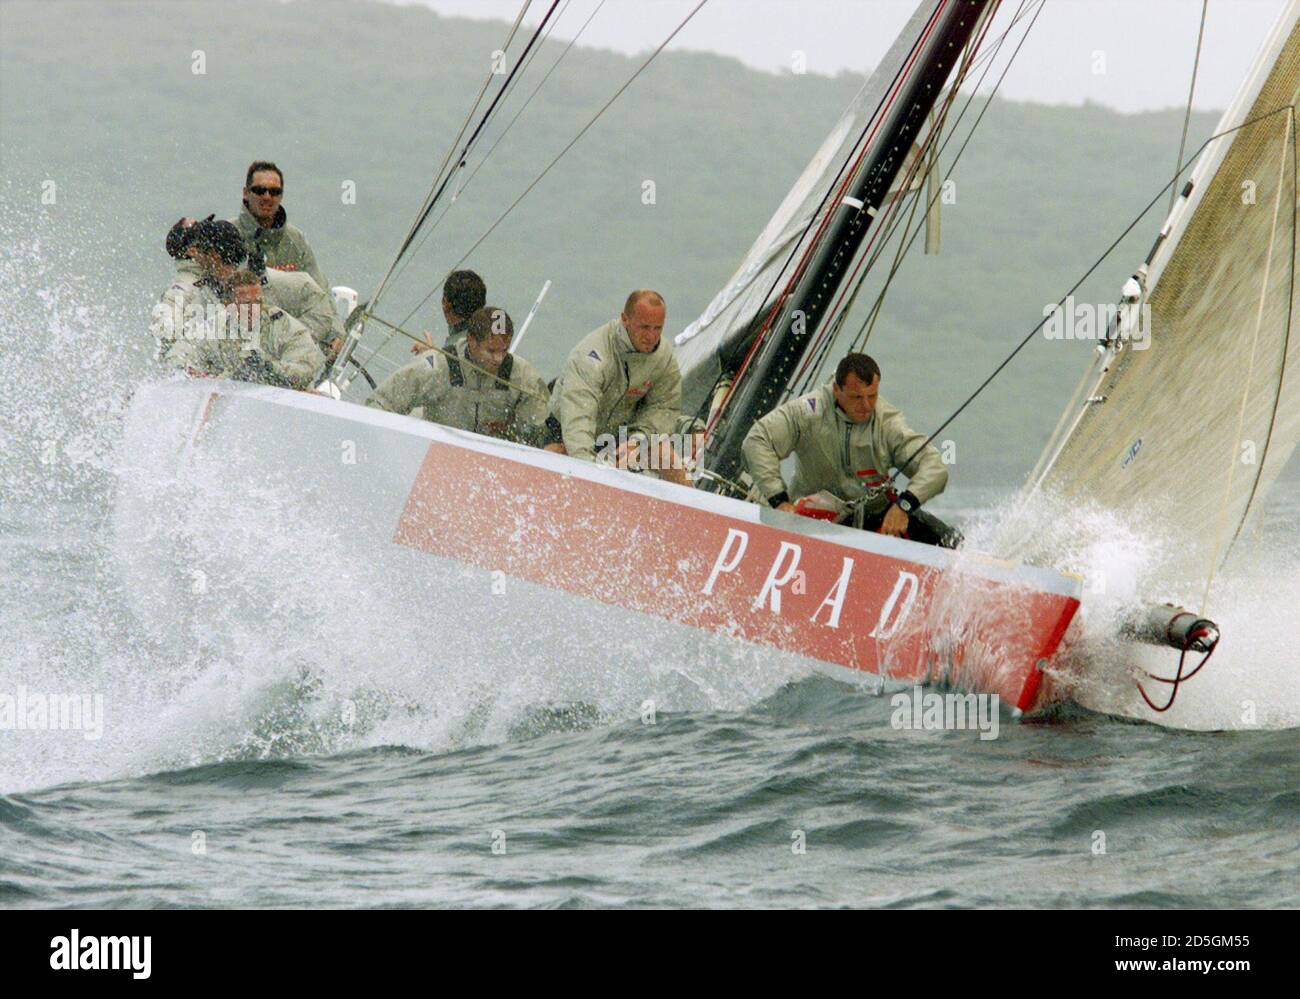 Italy's Prada number one boat ITA 45 with skipper Francesco de Angelis at  the helm prepares to round a mark during training on Auckland's Hauraki  Gulf February 14. Italy's Prada Challenge take